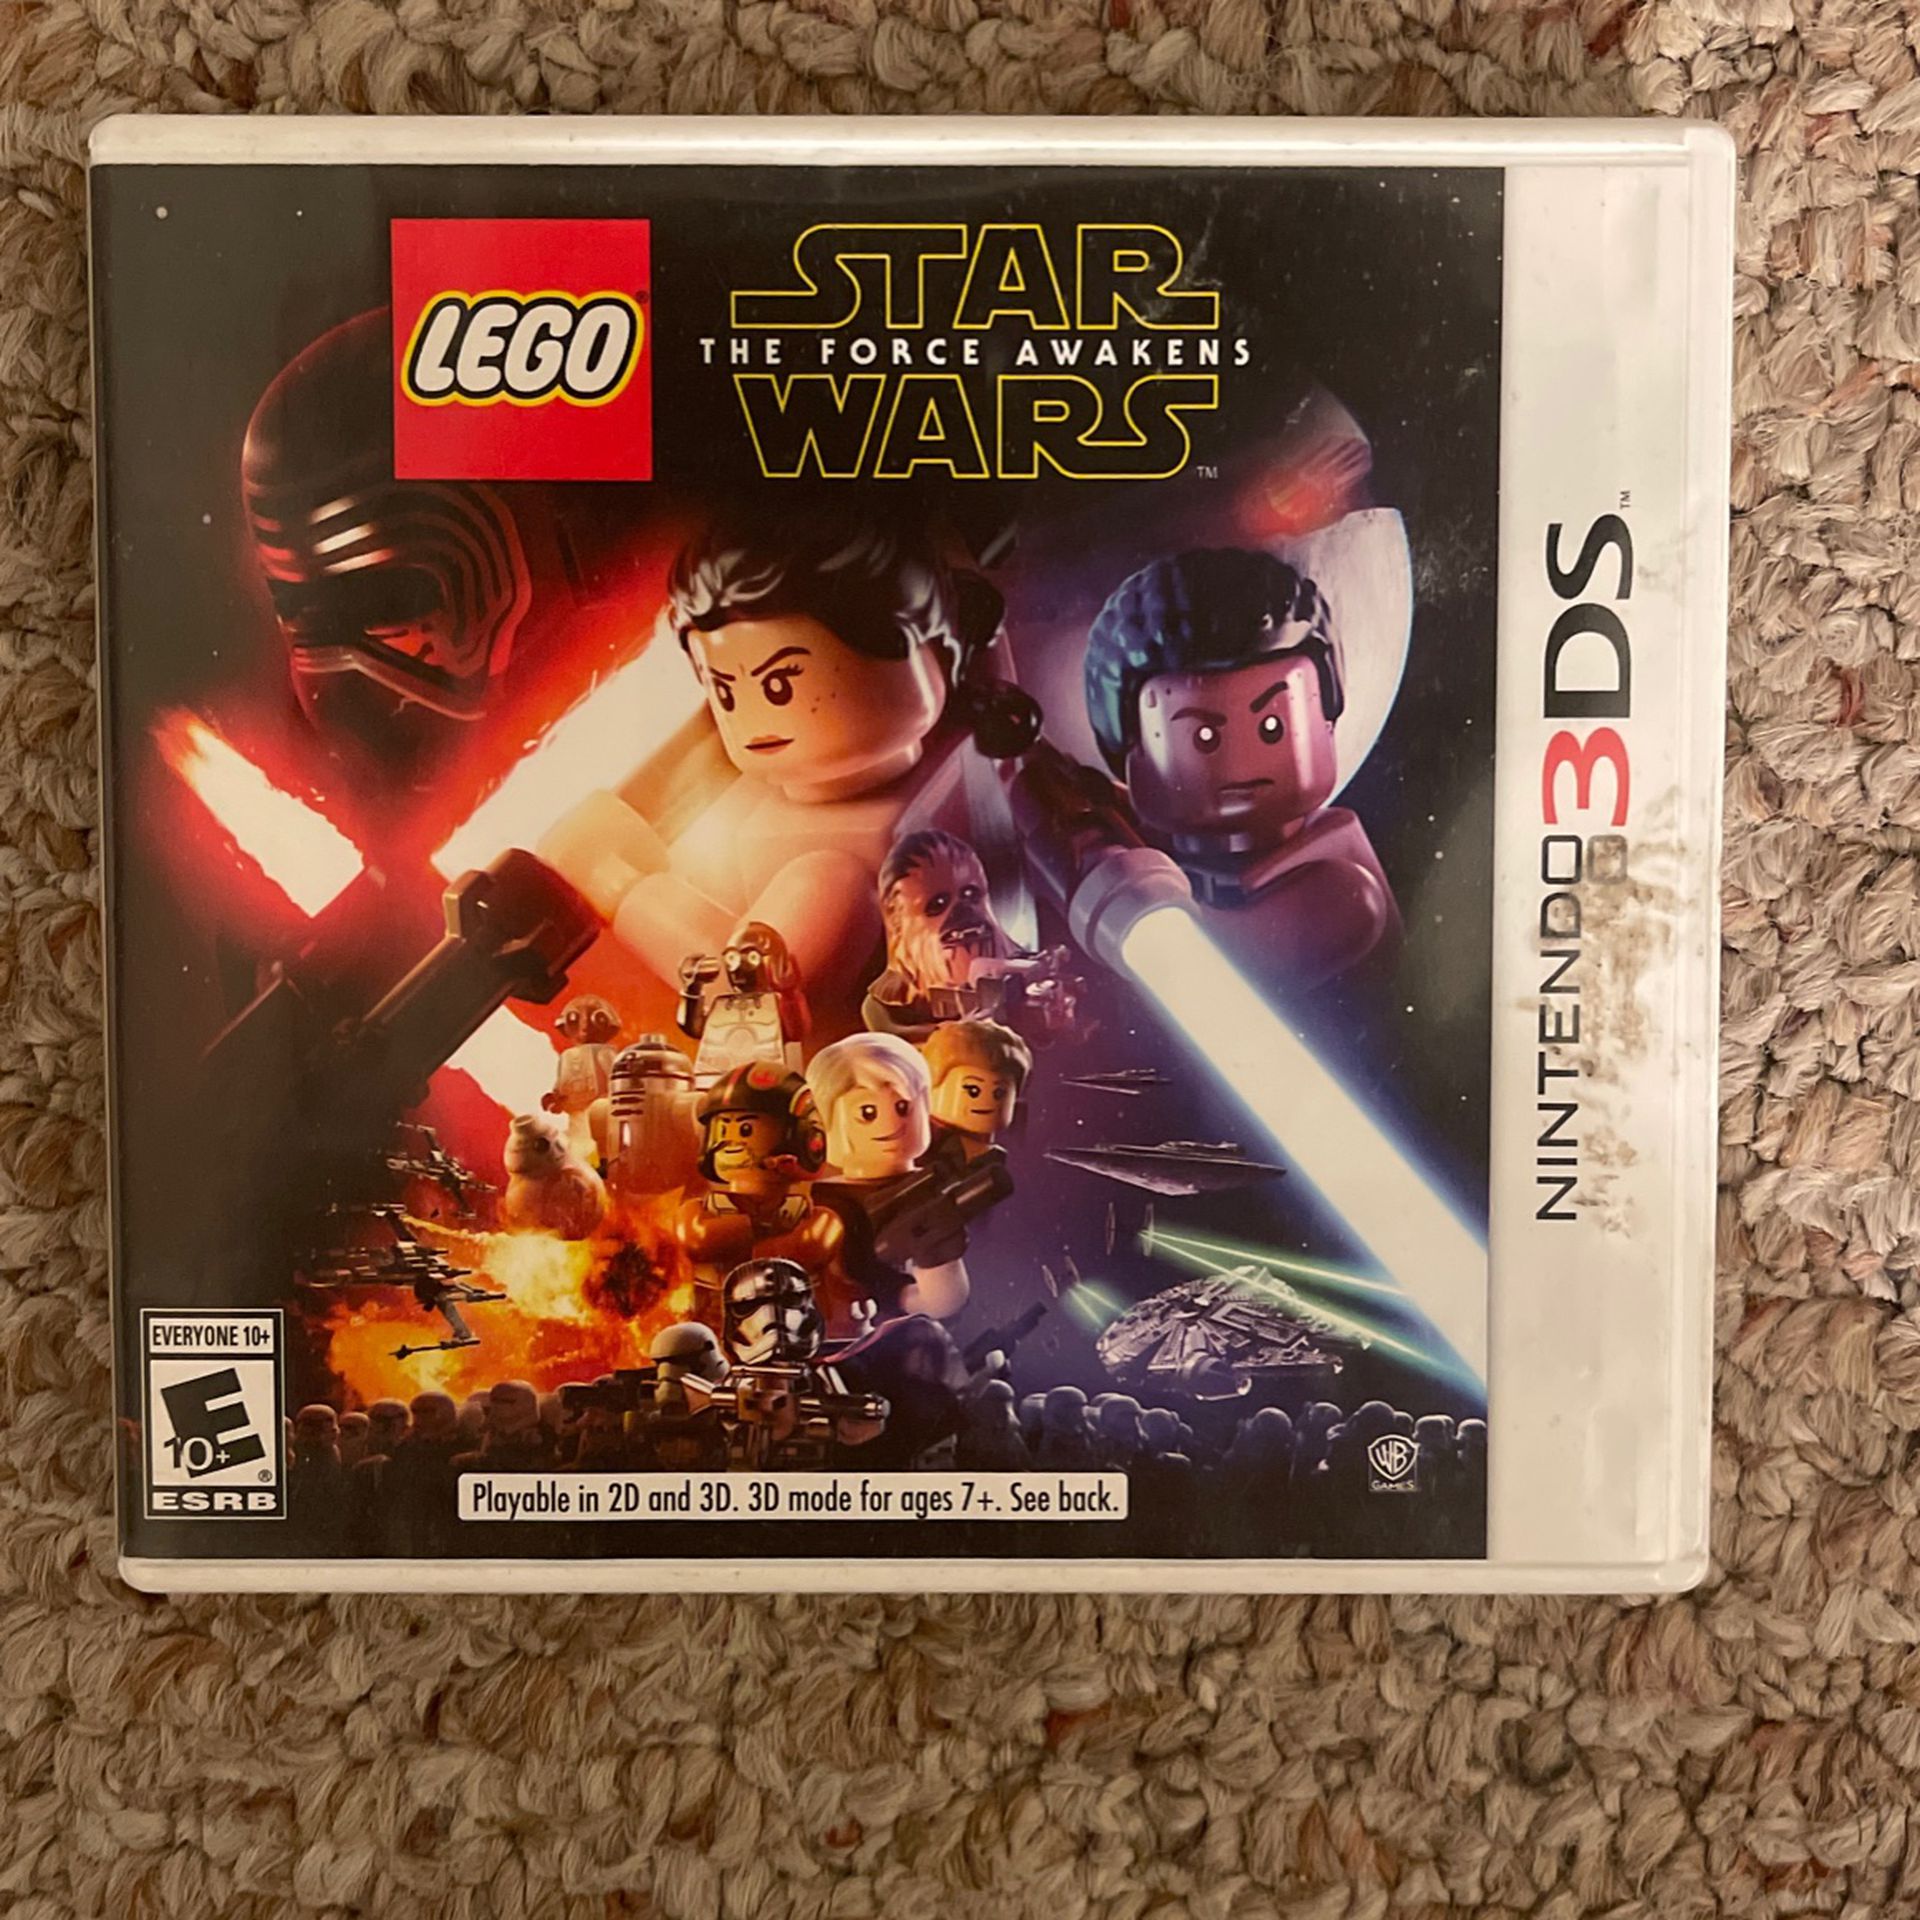 Lego Star Wars. The Force Awakens. 3ds